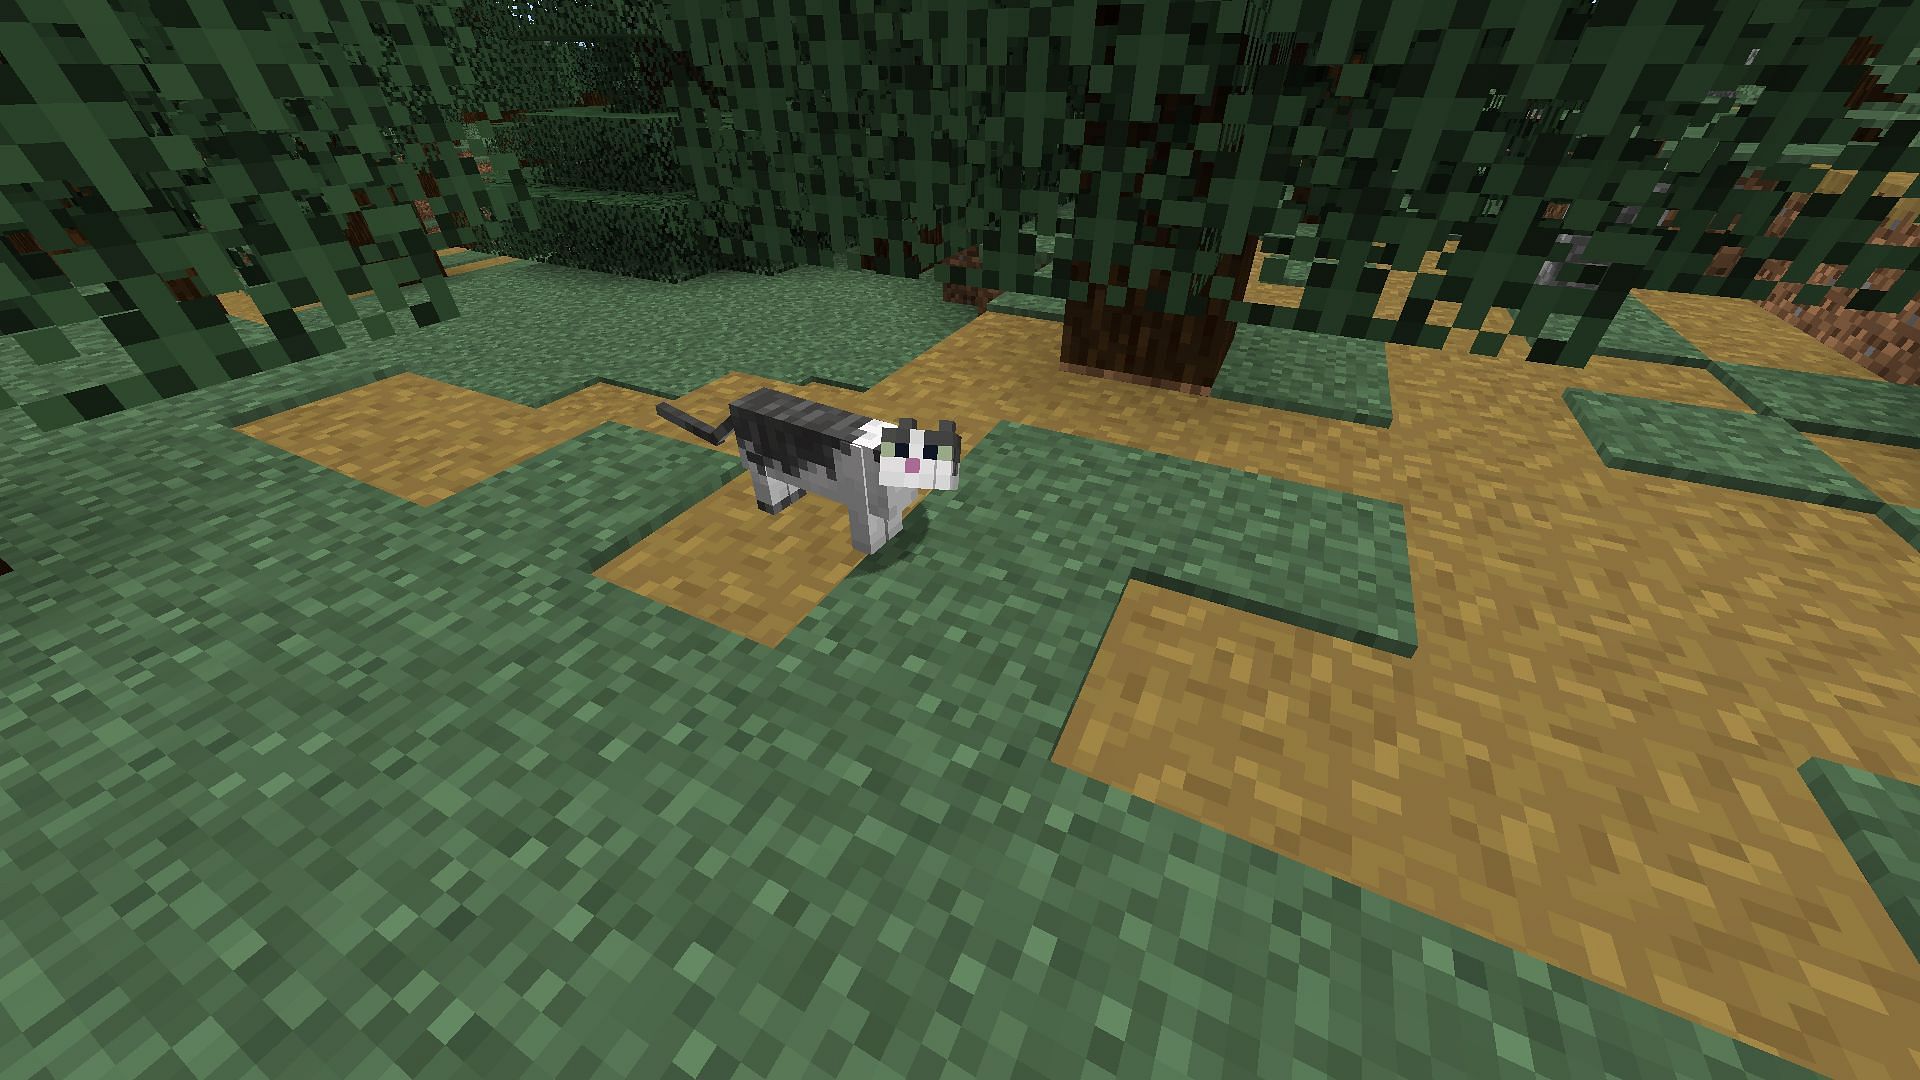 Cats can scare away creepers in Minecraft (Image via Mojang)